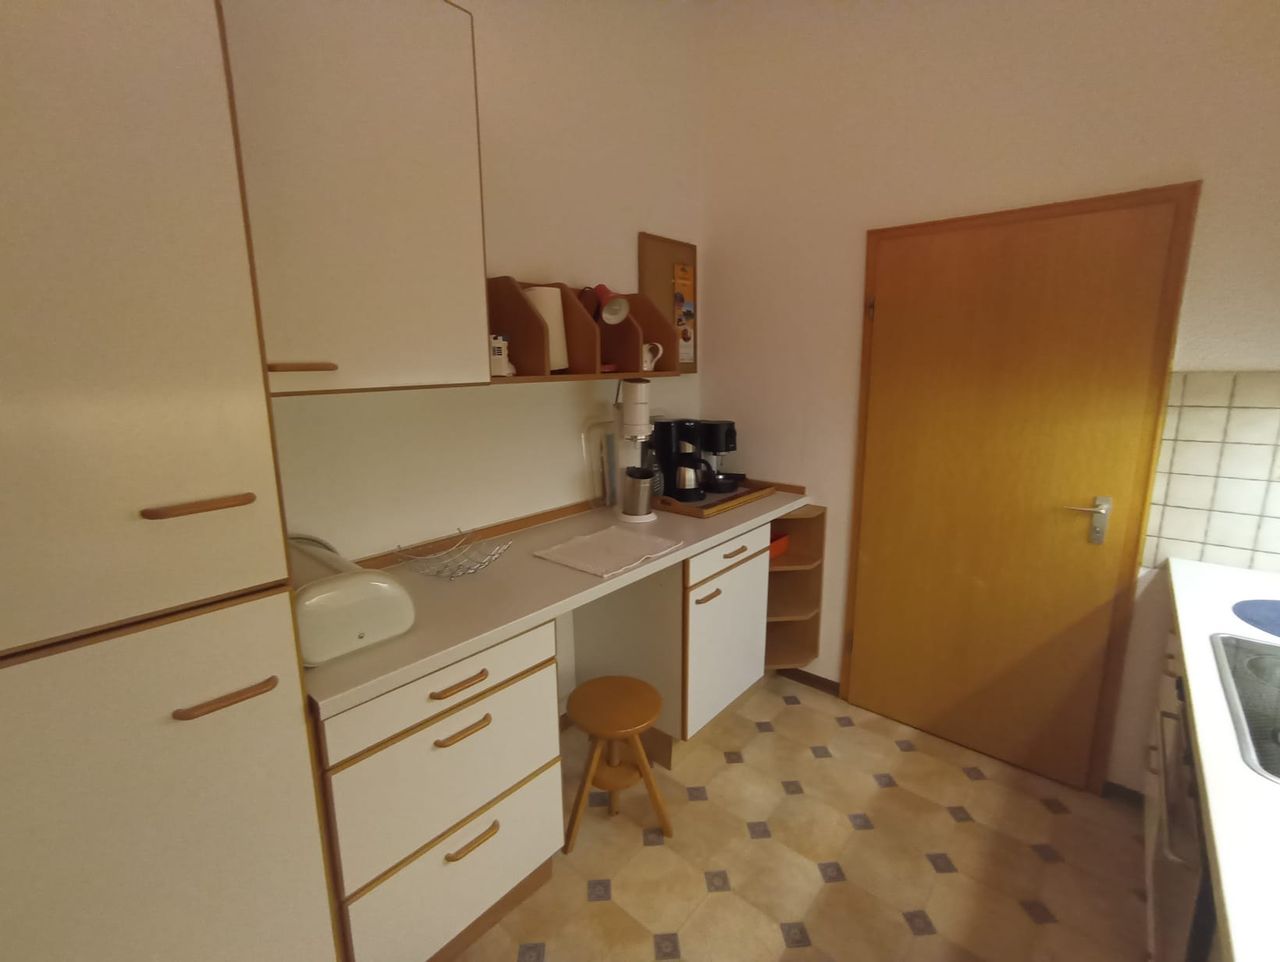 Flat in Wuppertal - Sublease from 15.04 to 15.07.24